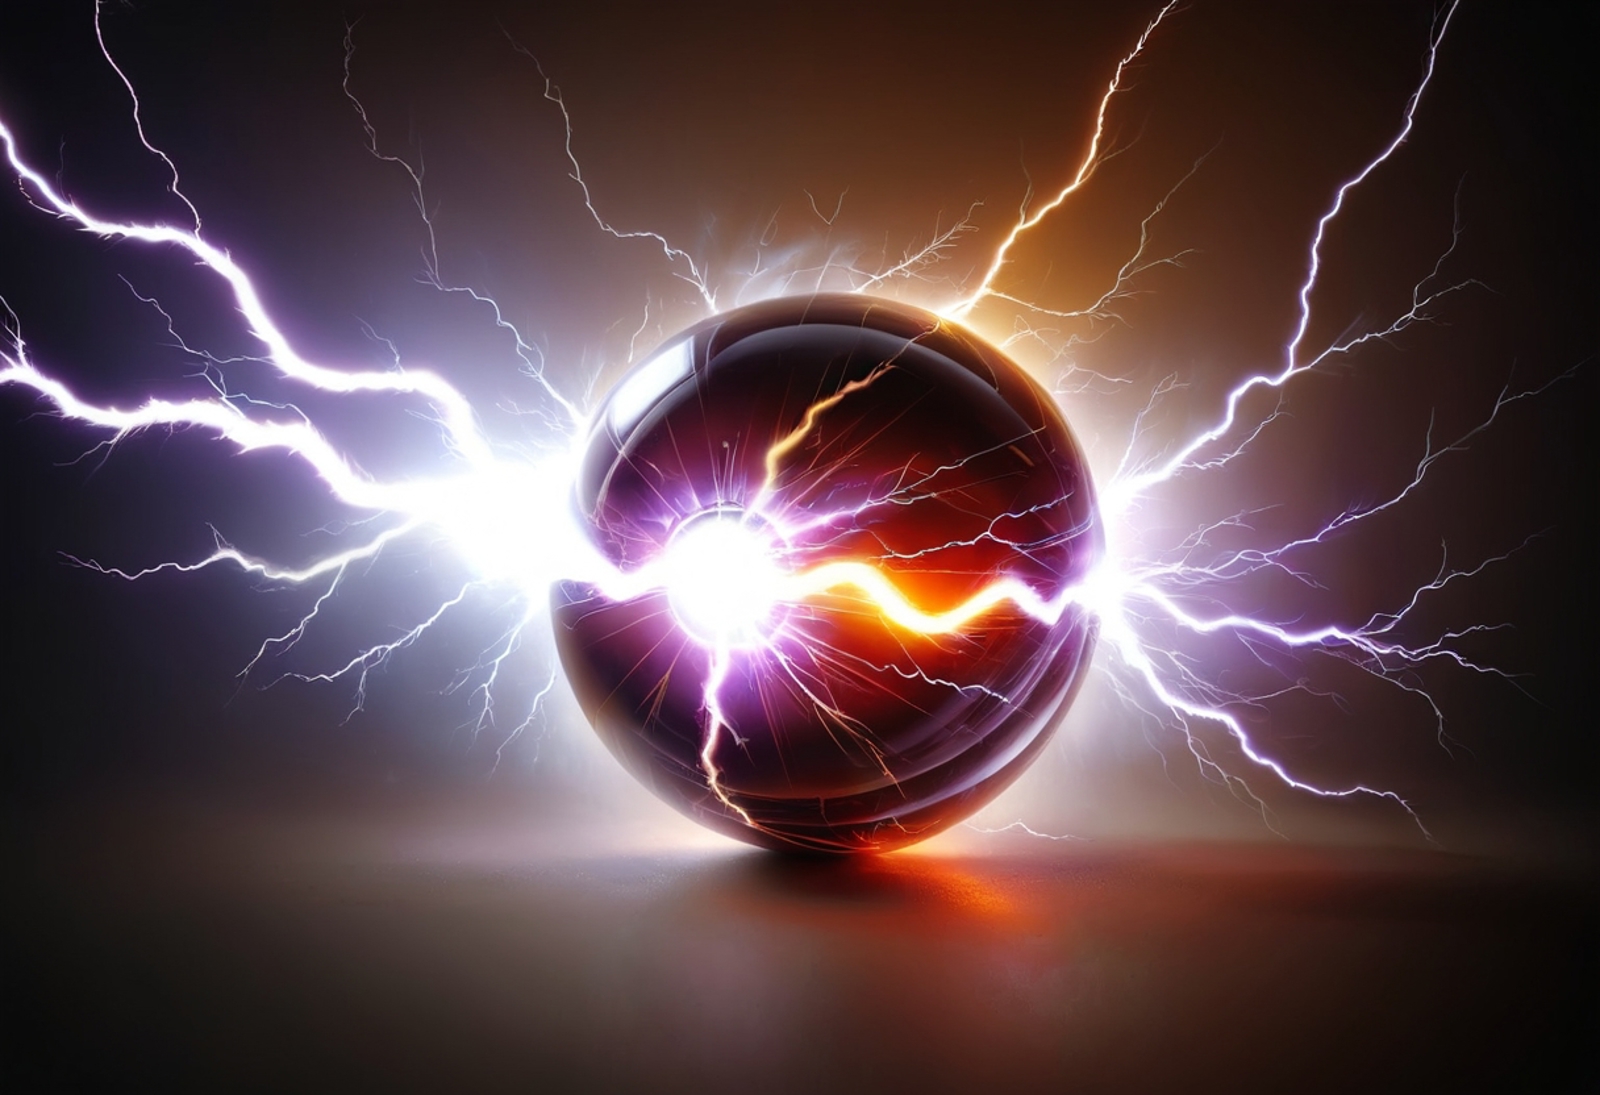 Why I'm opting out: A thoughtful perspective on Lightning merged checkpoints